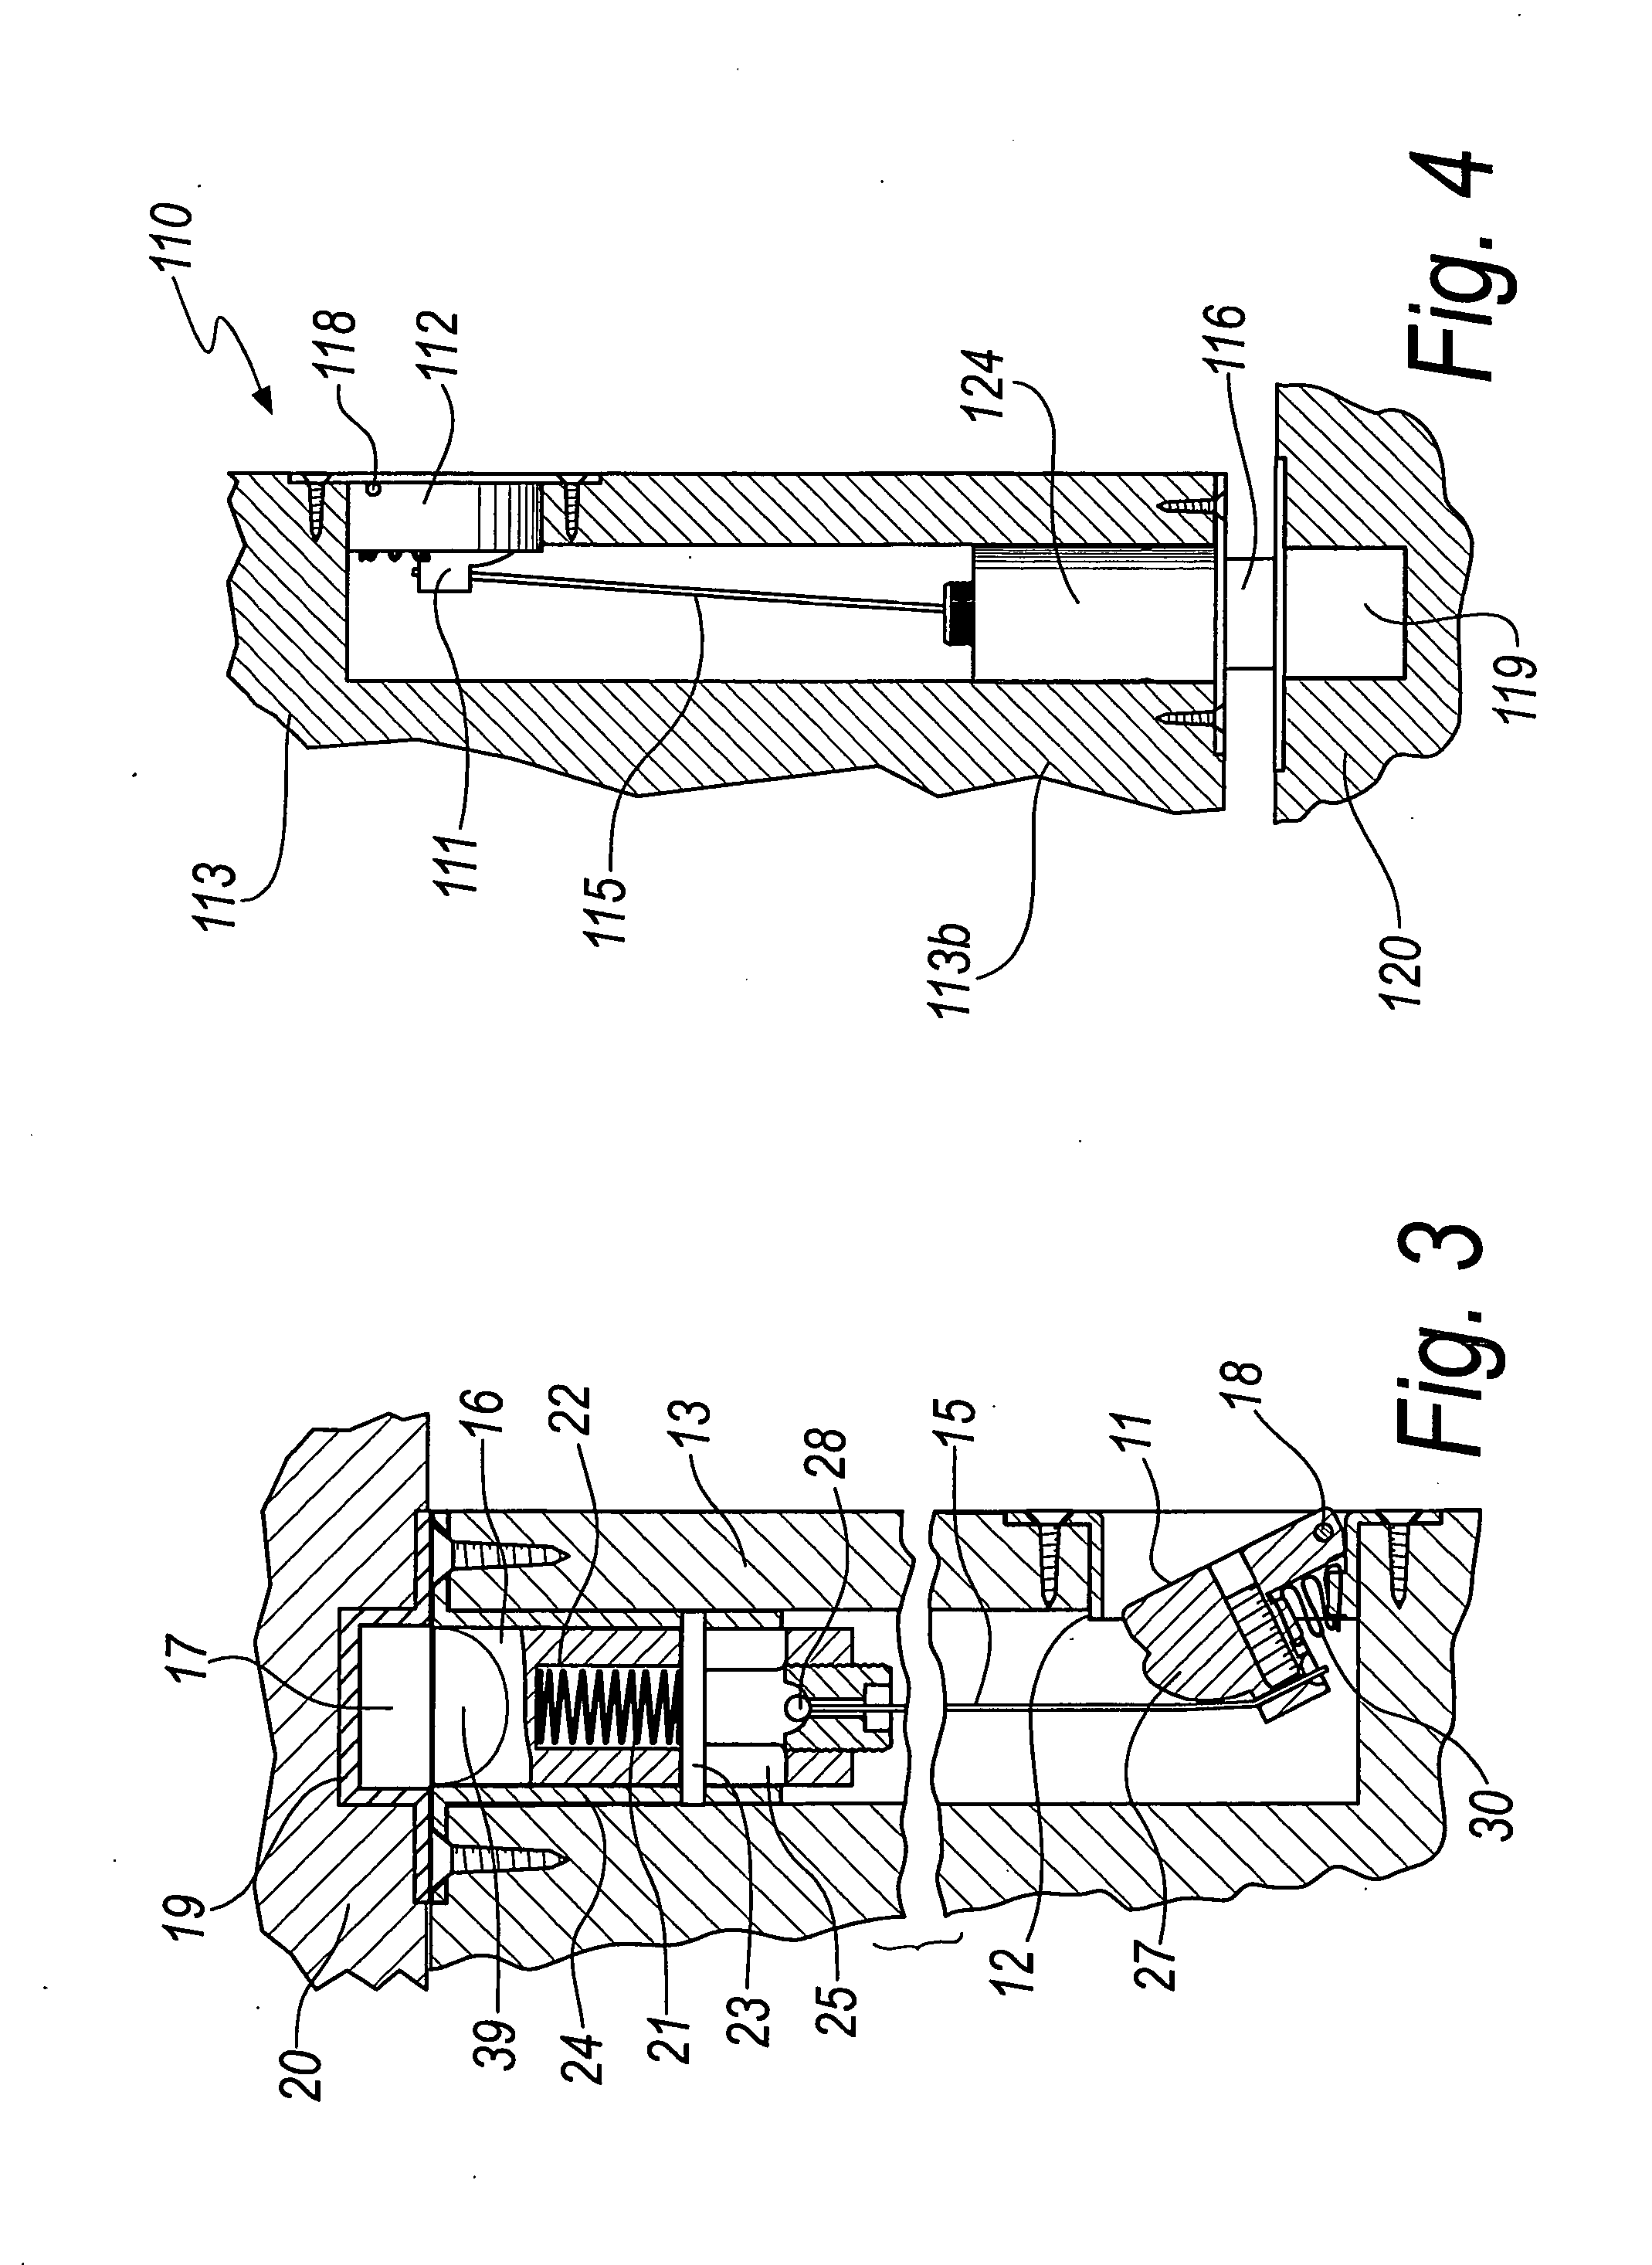 Device for locking second leaves in the closed configuration